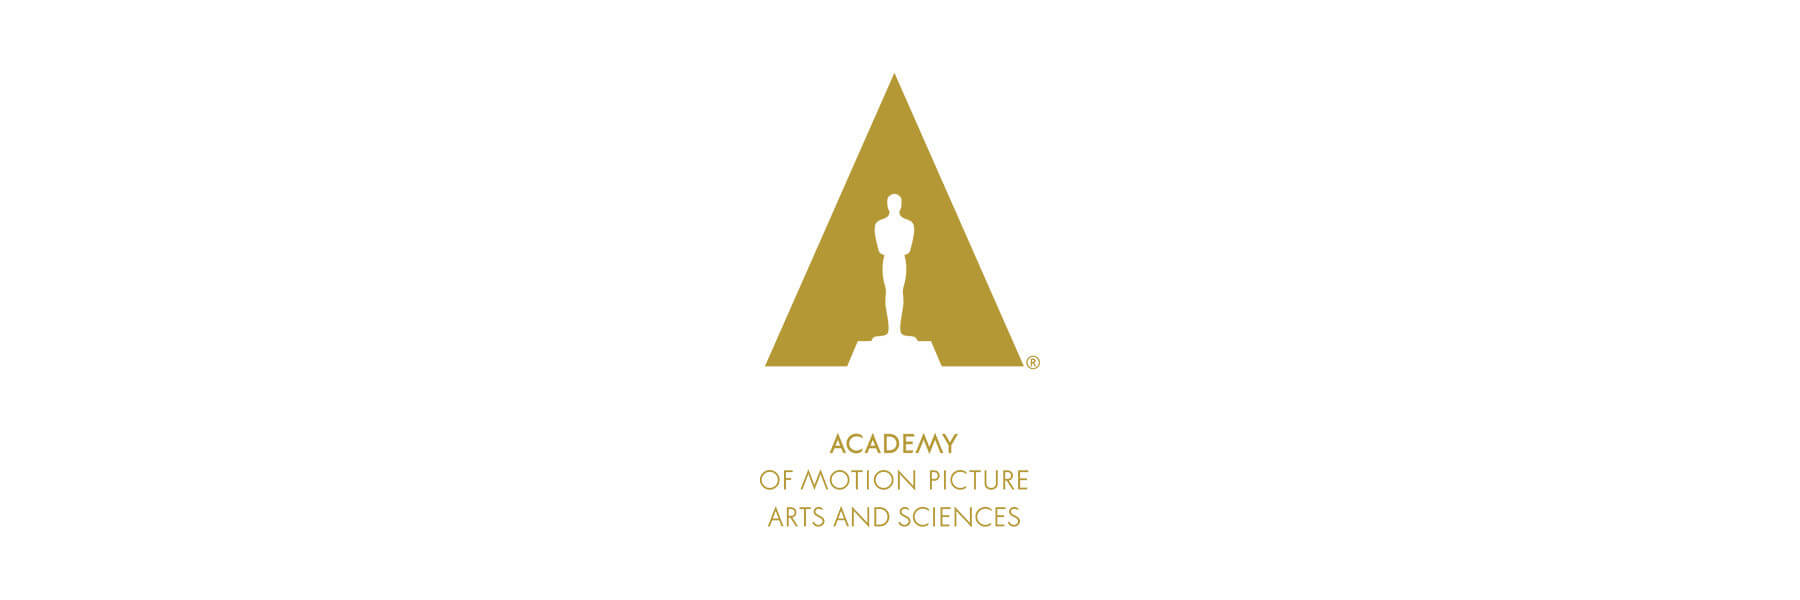 Academy fo Motion Picture Arts and Sciences logo